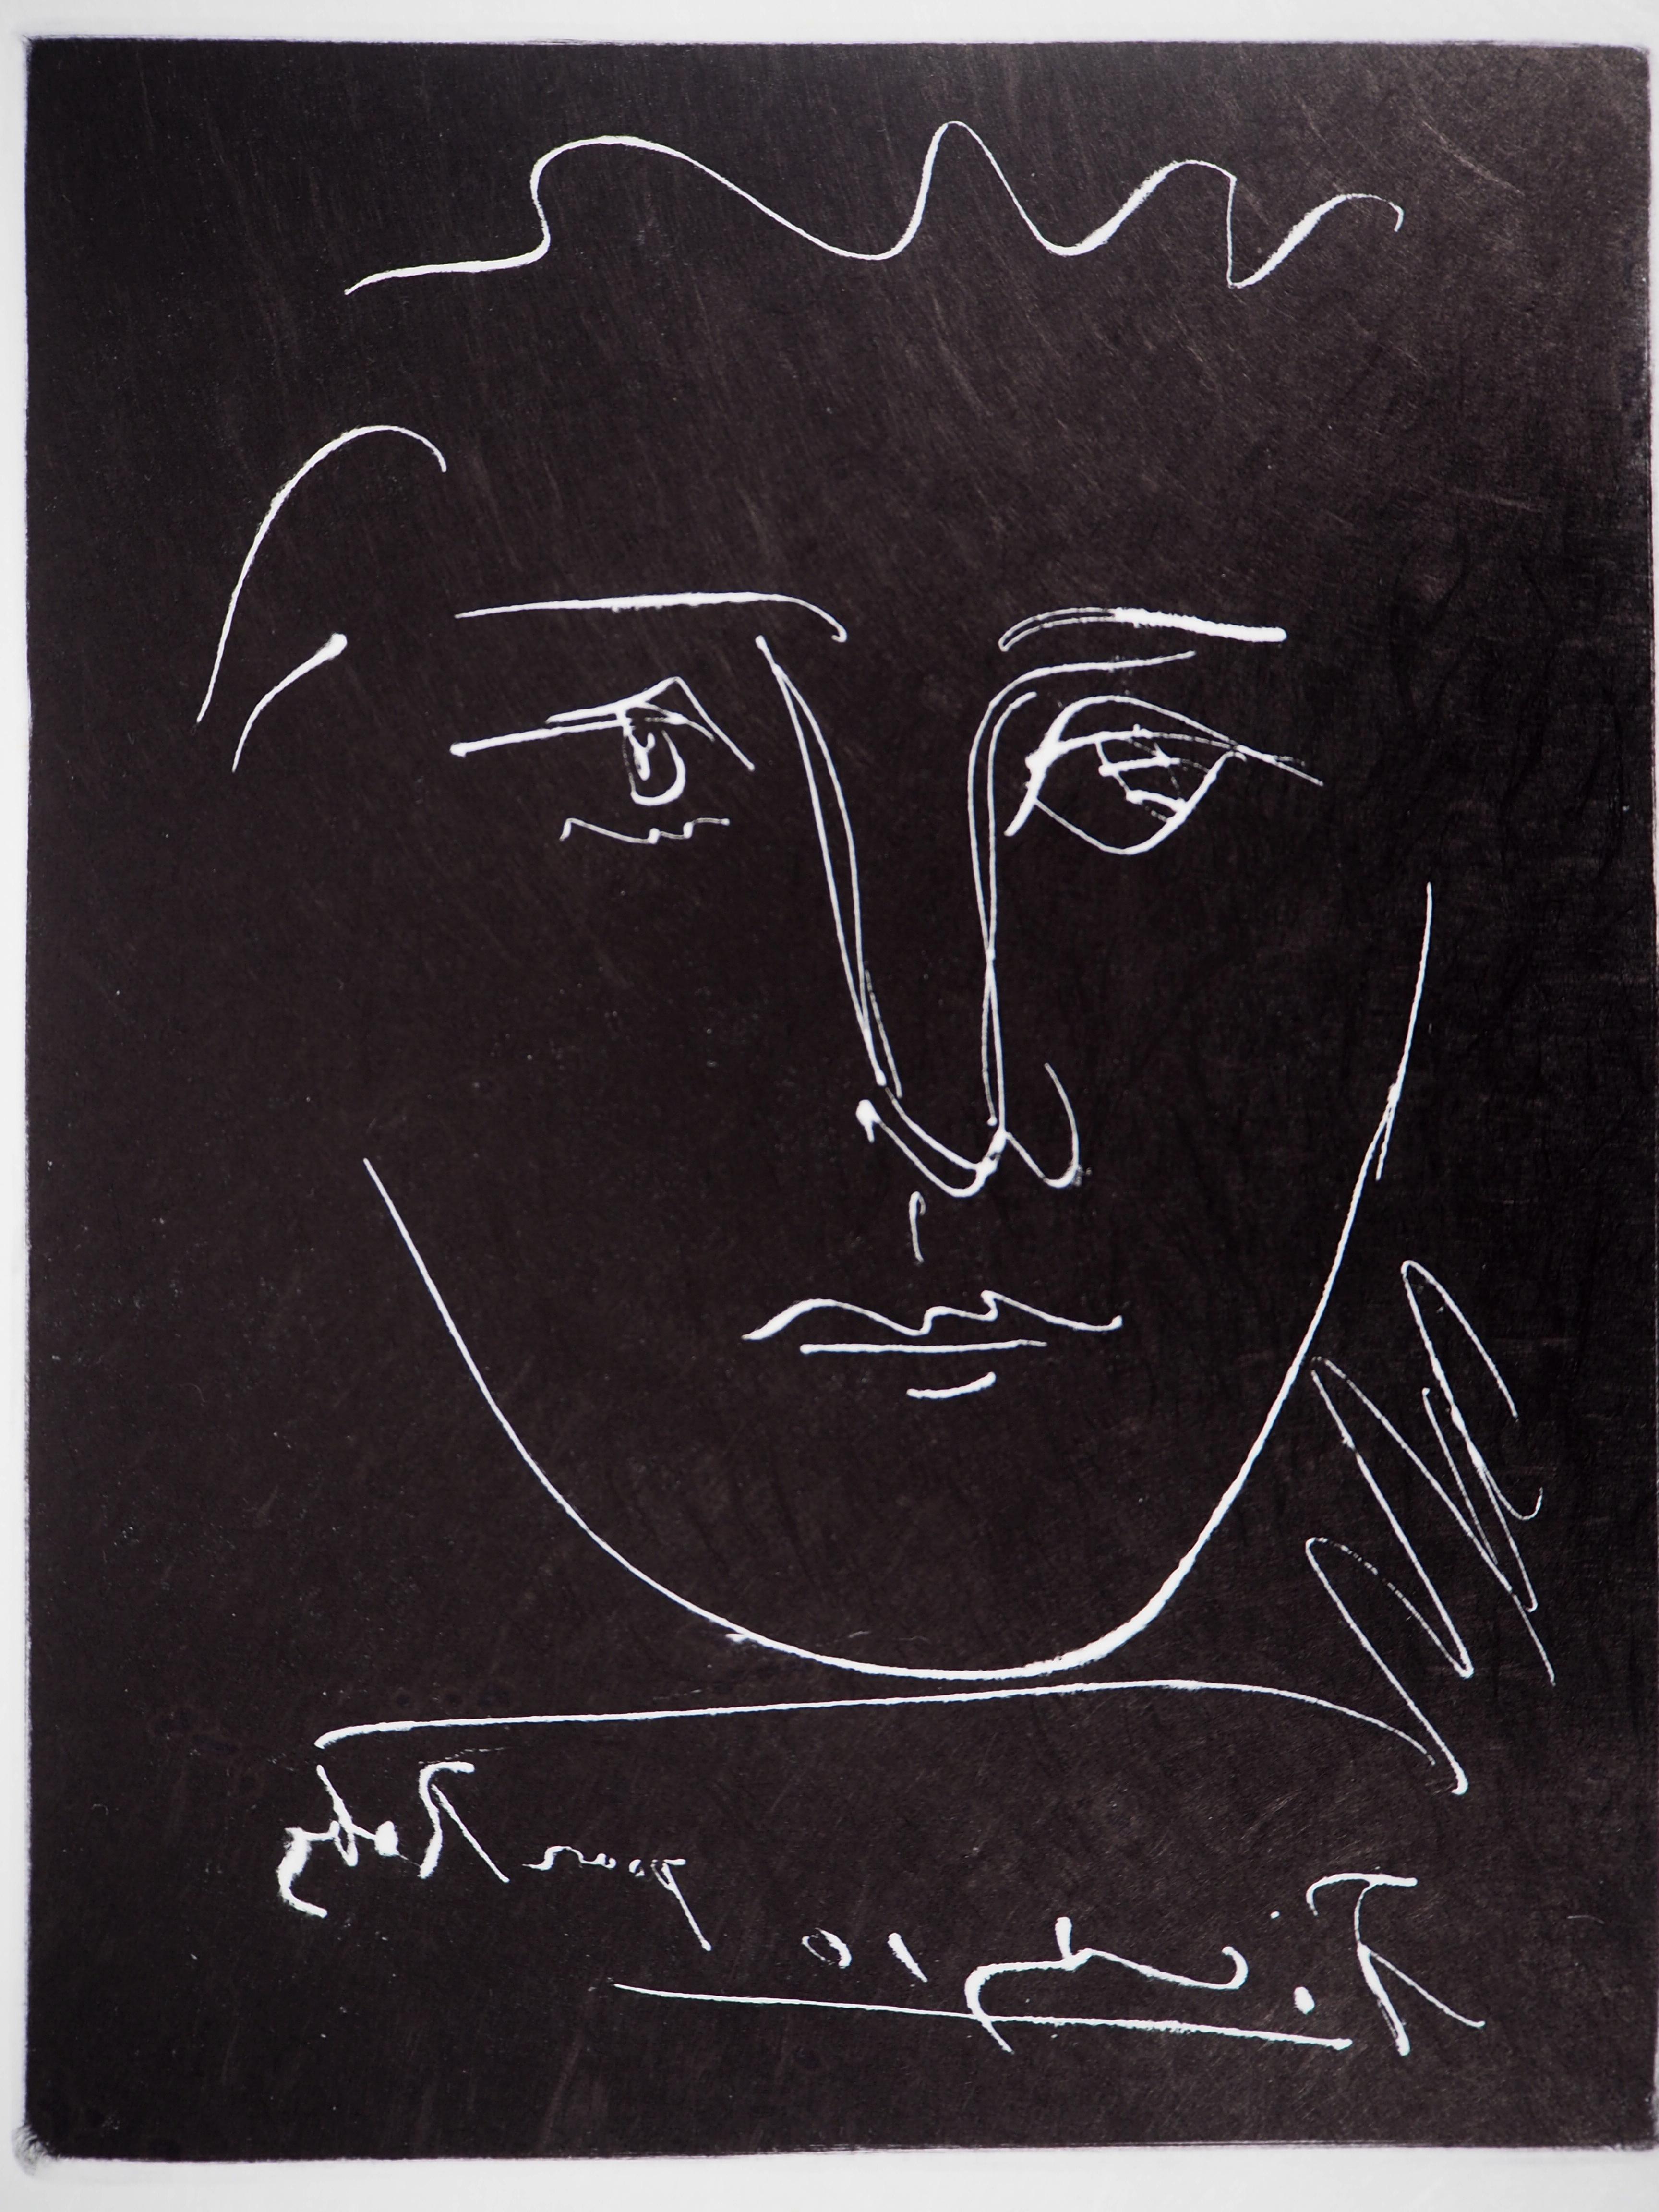 Pablo PICASSO
Portrait of Roby, c. 1950

Original etching
Printed signature in the plate
On Japan paper 33 x 25 cm (c. 13 x 10 in)

REFERENCE : Catalog raisonne Bloch #680
From the edition by 'New York collector guild'

Excellent condition